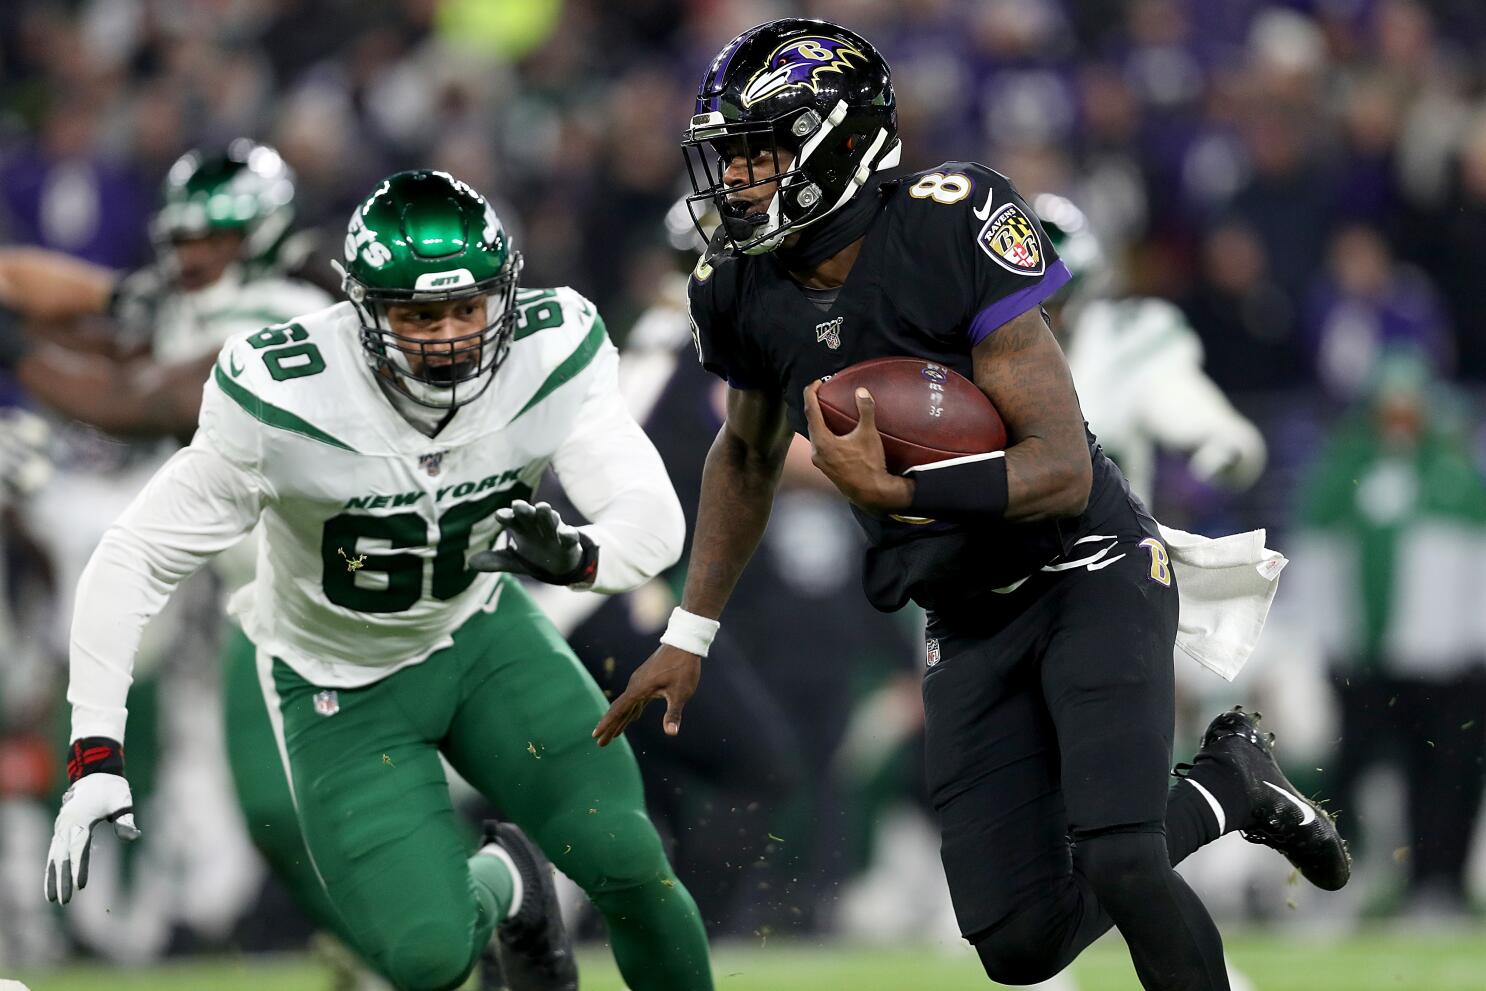 NY Jets players line up for Lamar Jackson jerseys after he destroyed Jets